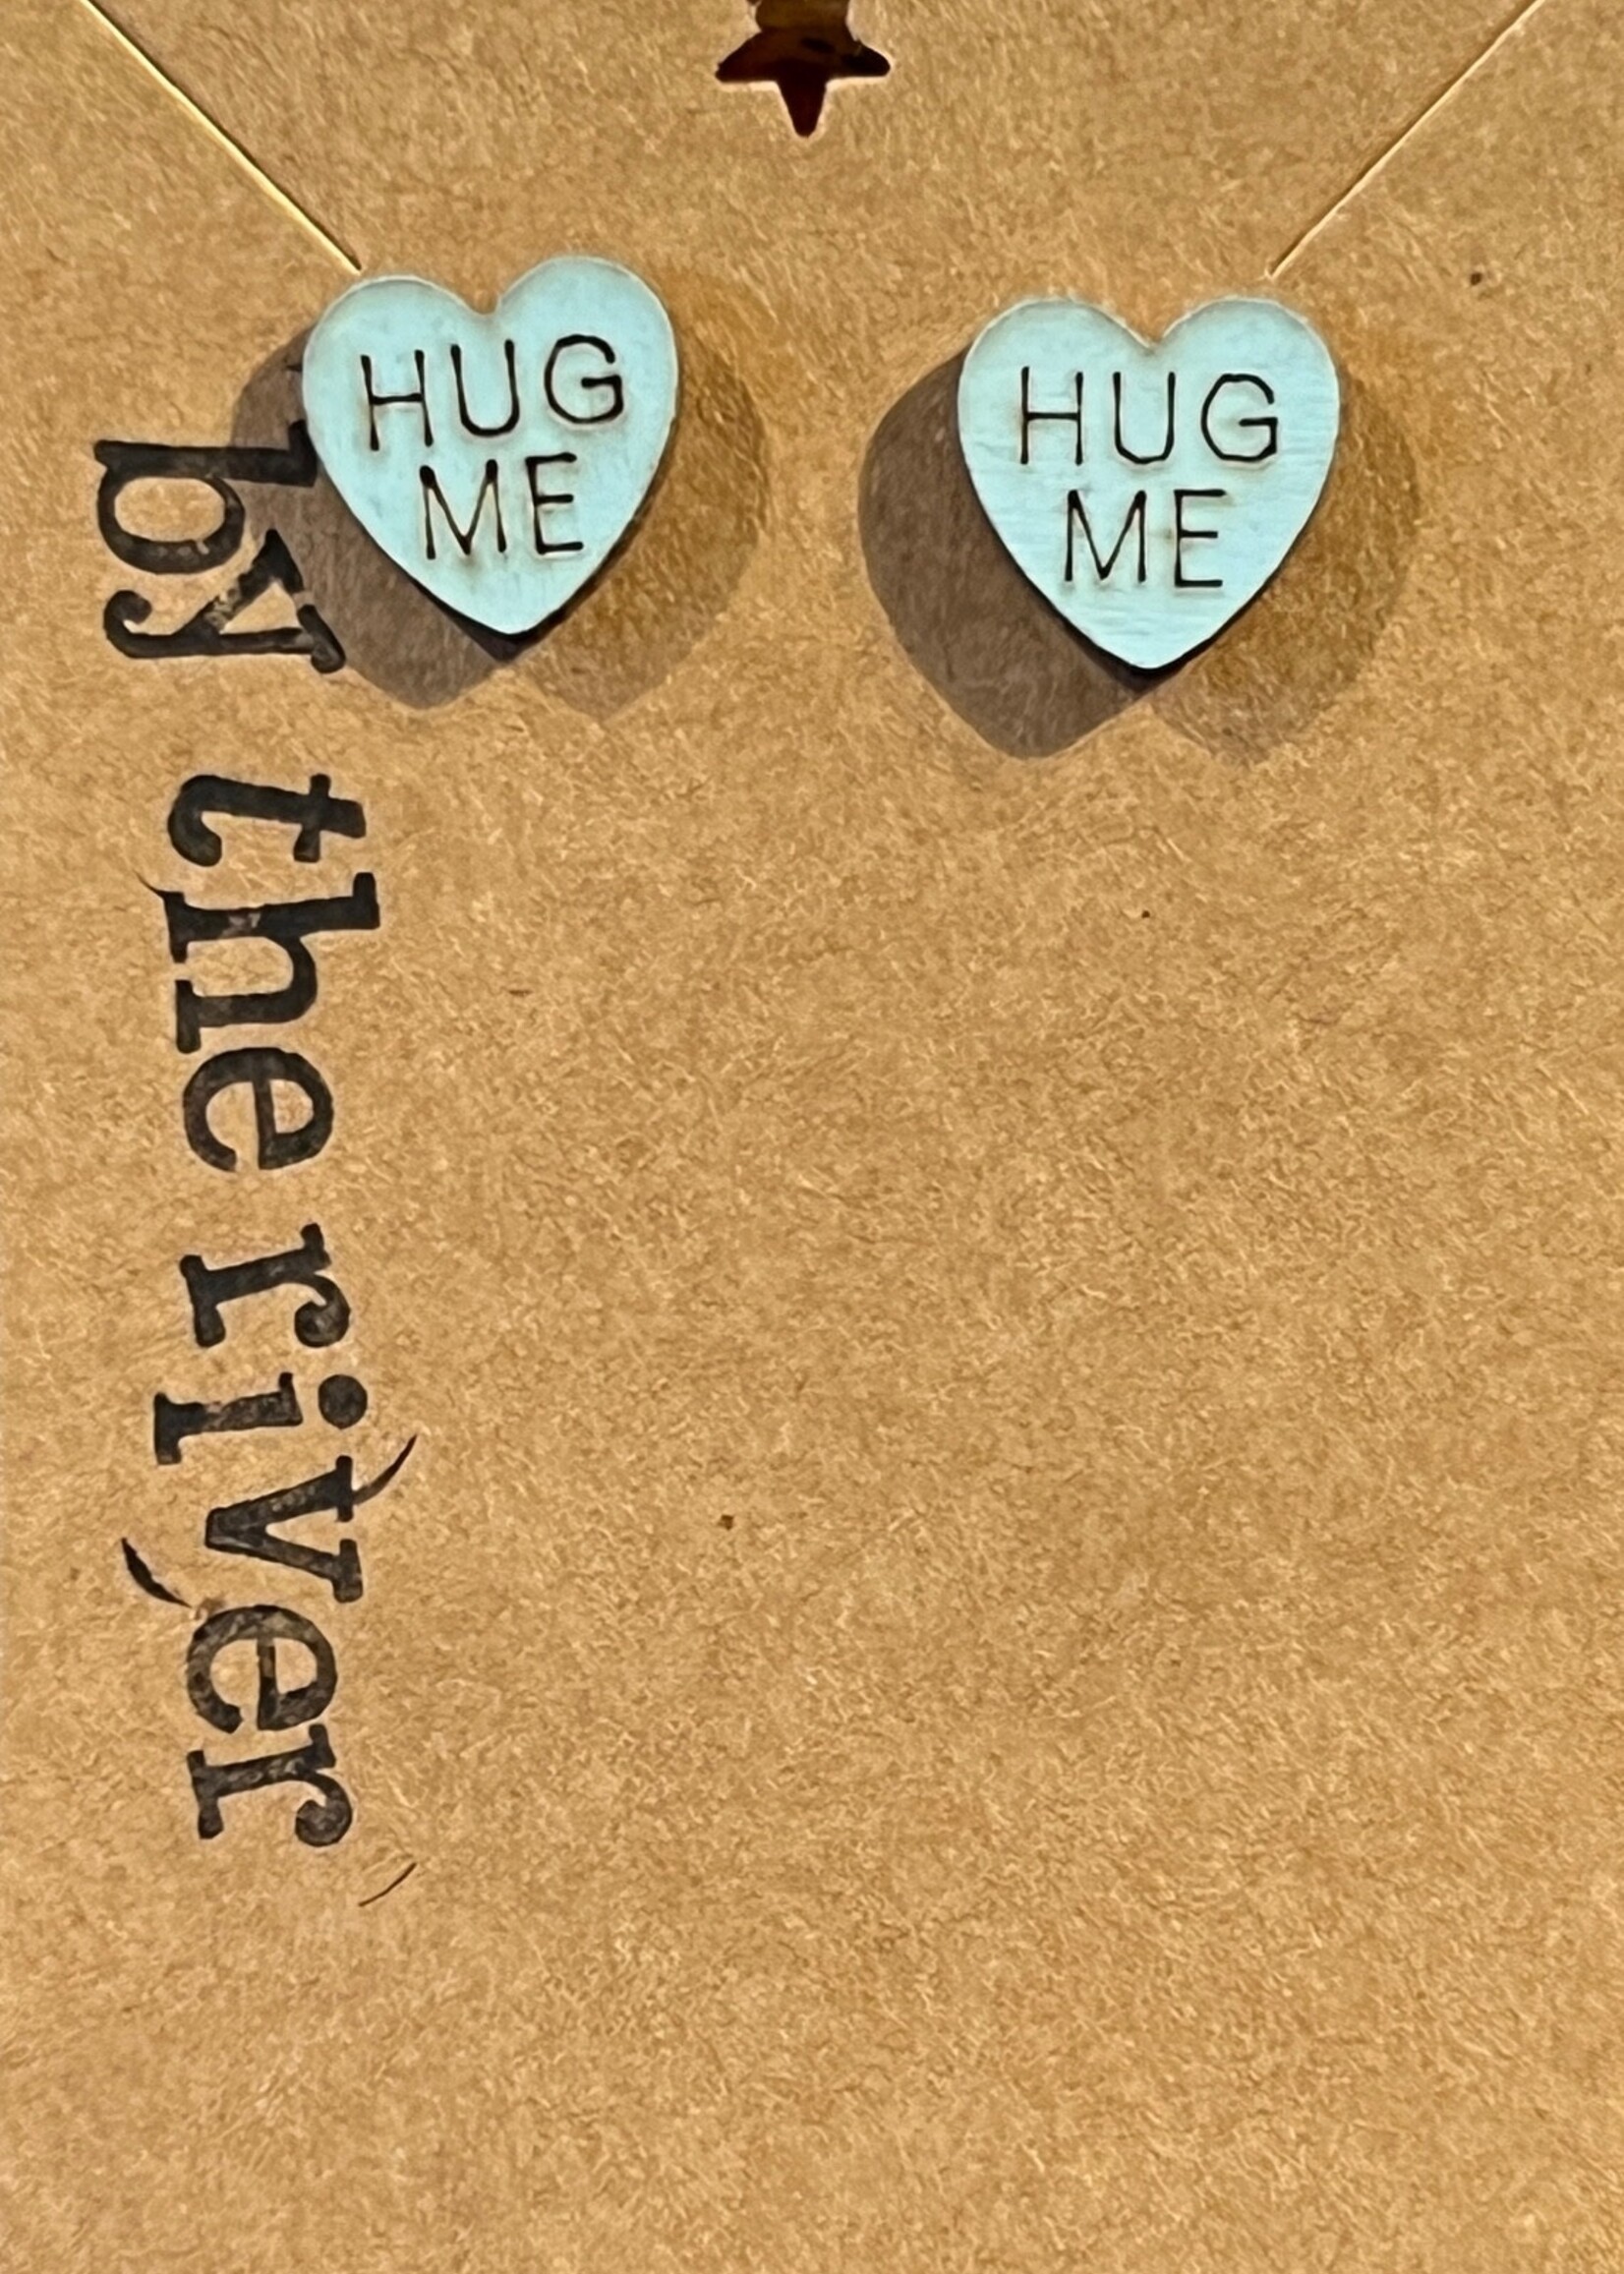 By the River Jewelry Hug Me Candy Heart Stud Earrings Teal Wood